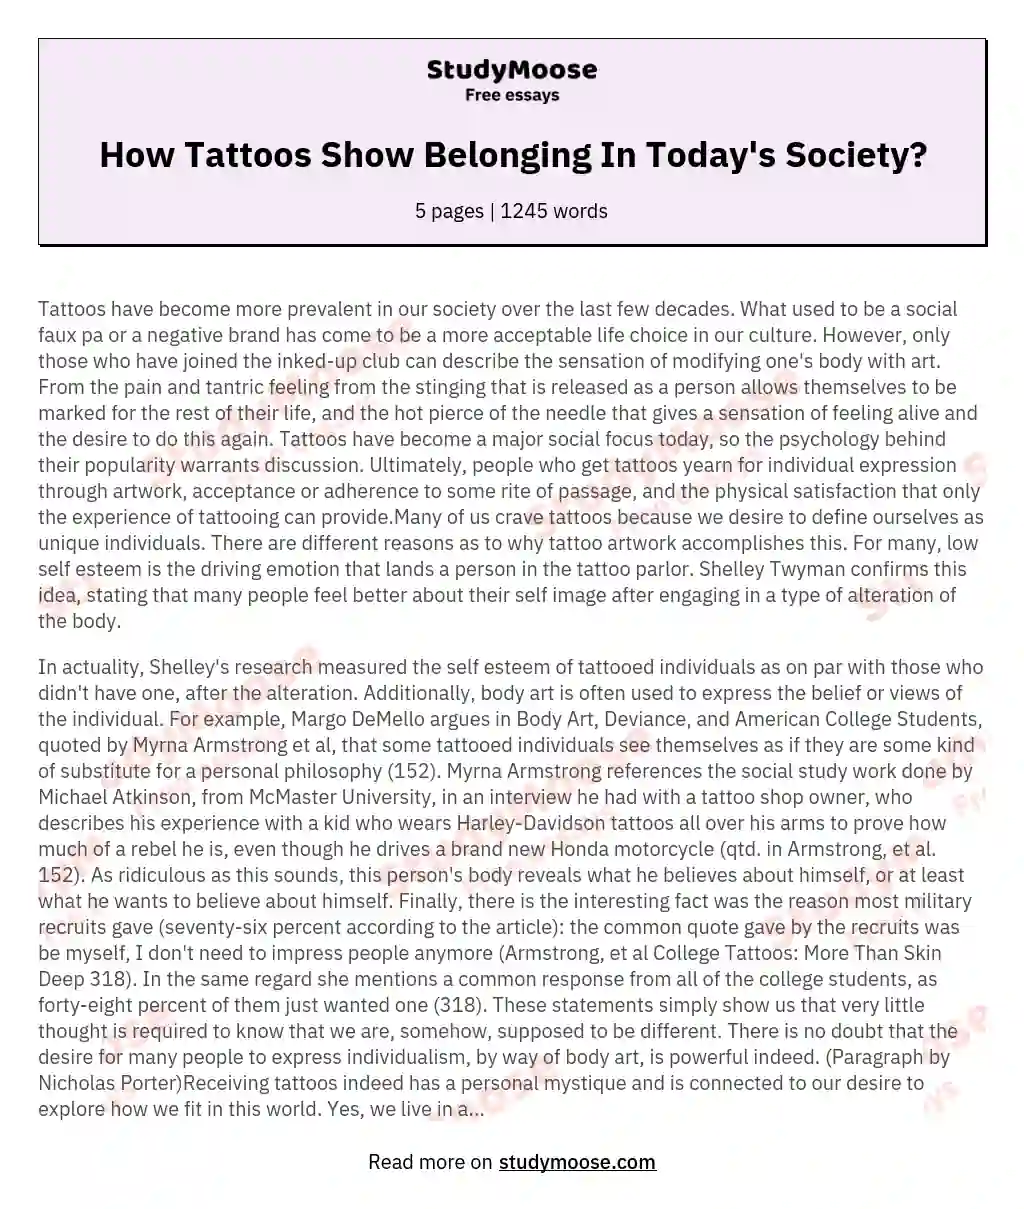 How Tattoos Show Belonging In Today's Society? essay